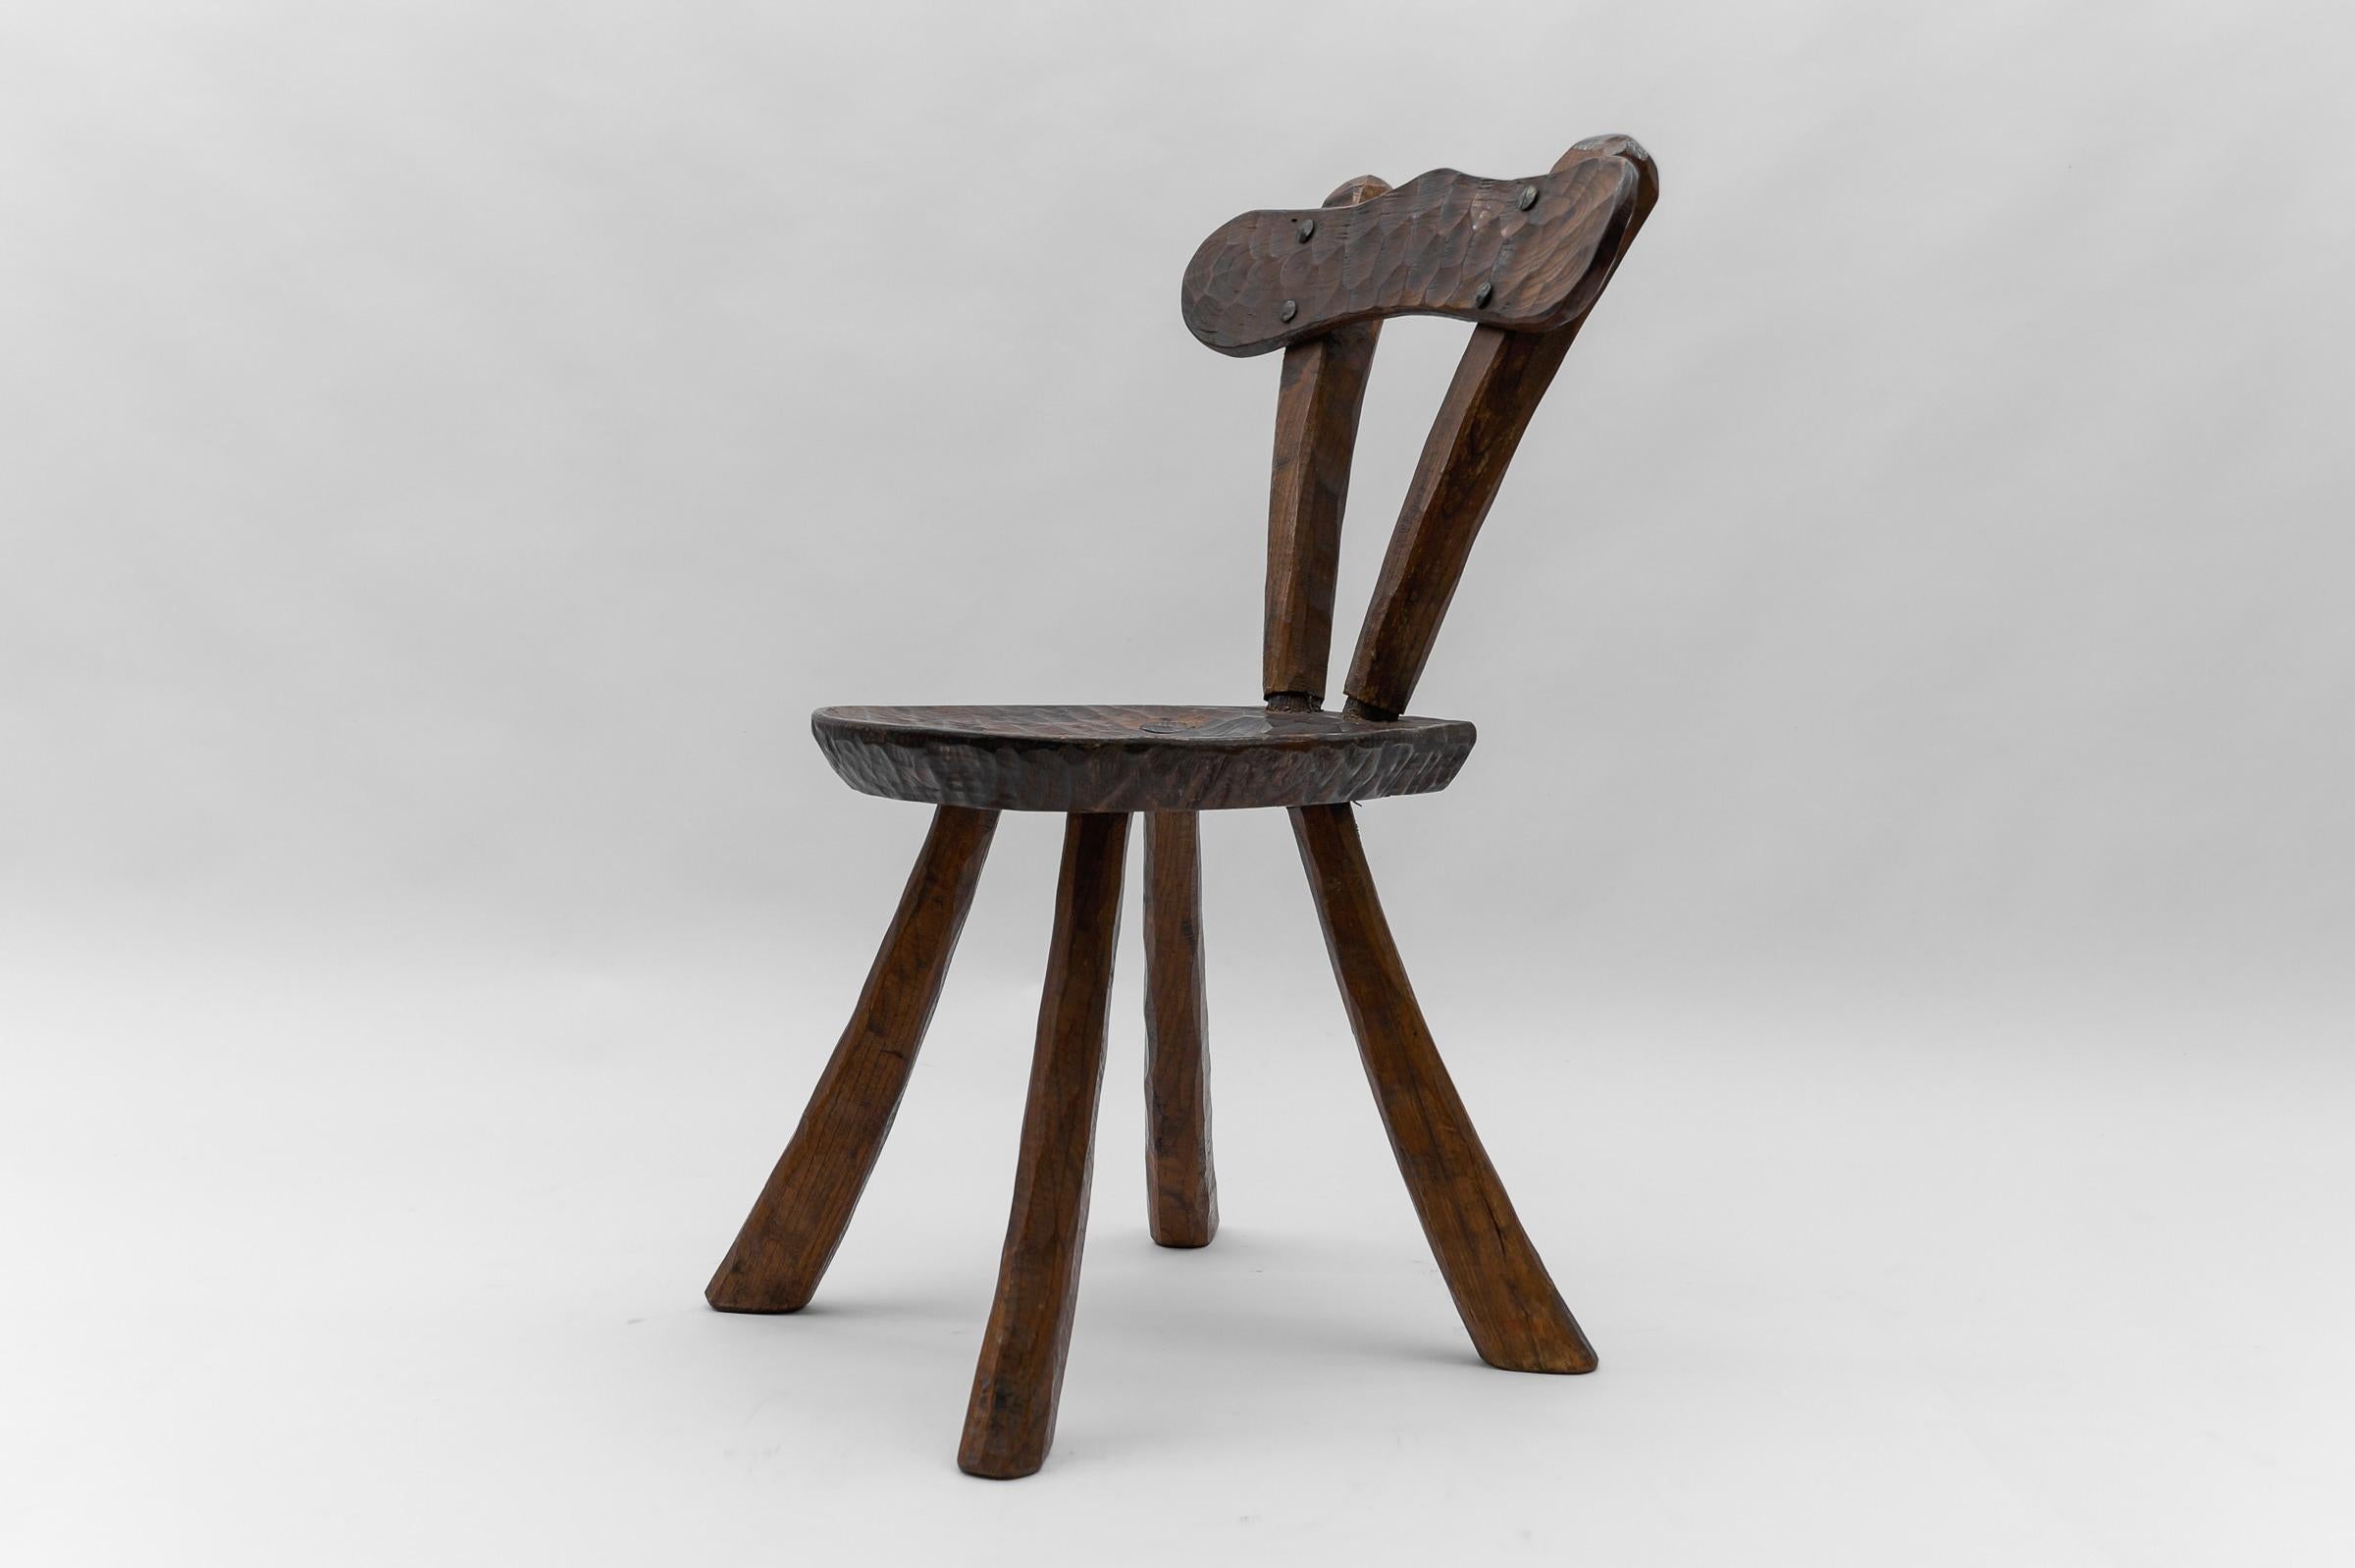 Hand-Carved Rustic French Provincial Sculptured Chair in the Style of Alexandre Noll, 1960s